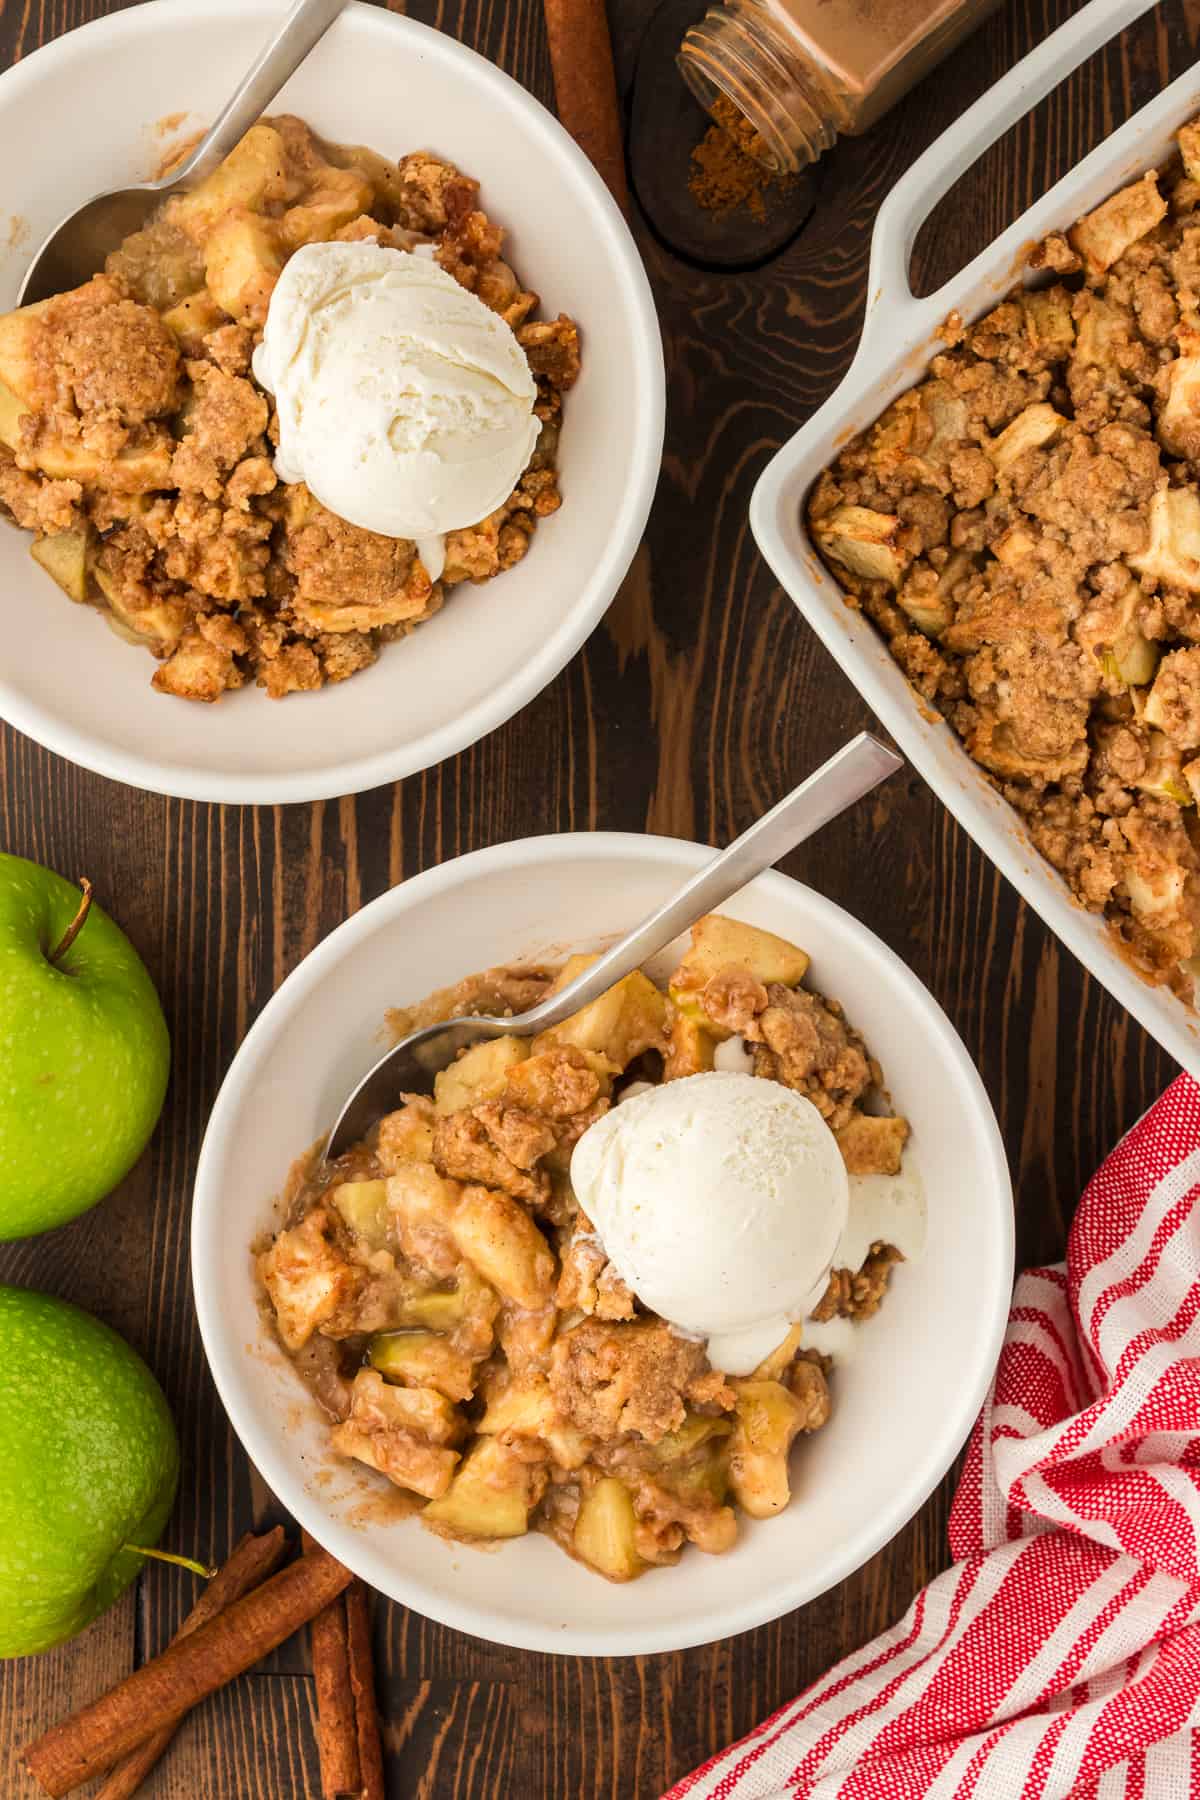 two bowls of apple crumble in a white bowl with a scoop of vanilla ice cream and a spoon, beside a white baking dish full of apple crumble, all on a wooden surface surrounded by a red and white striped kitchen towel, two green apples, cinnamon sticks and some spices